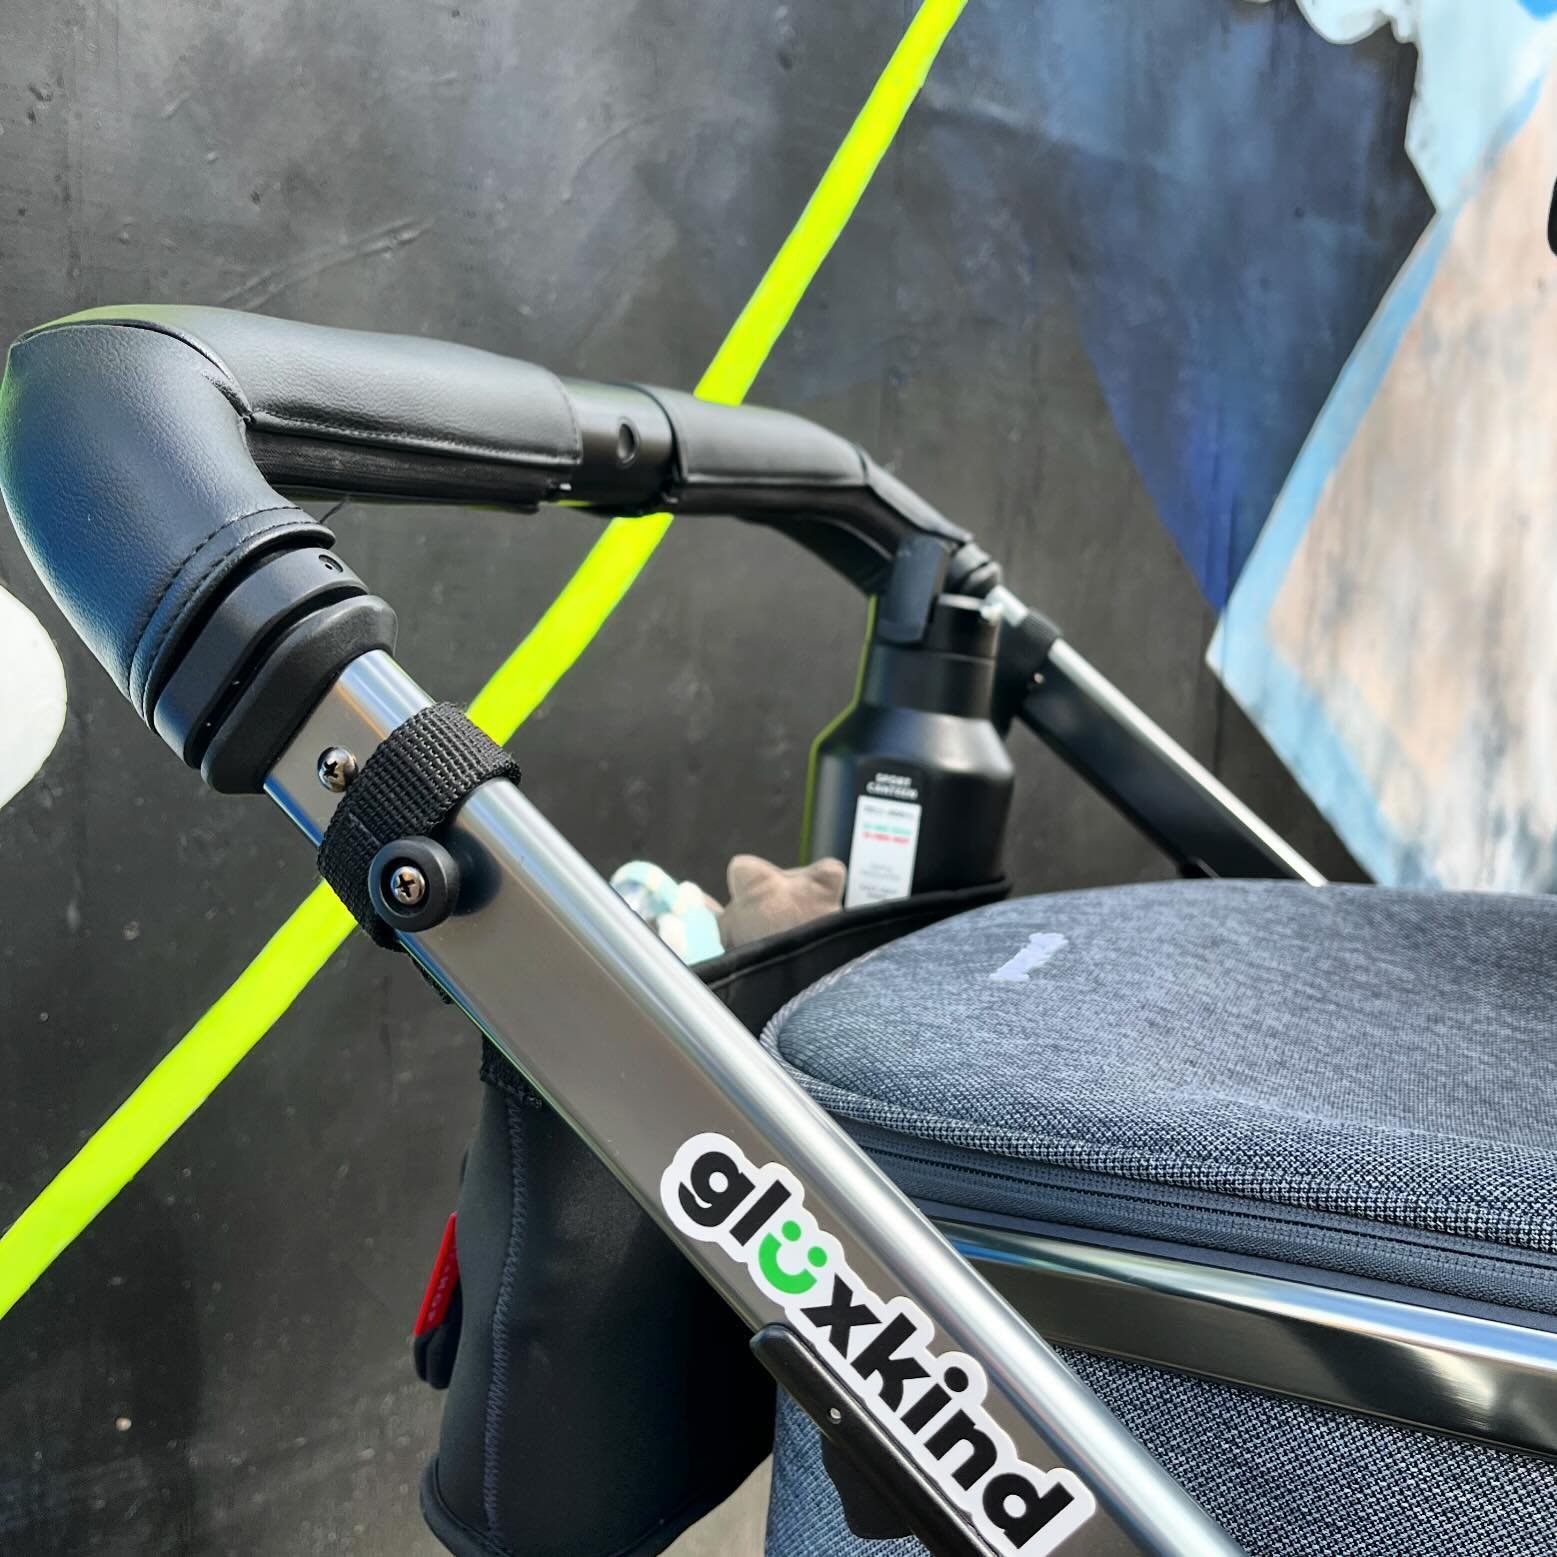 Gl&uuml;xkind strollers look like regular strollers but they really are an innovative companion for today&rsquo;s parents. We care about parents&rsquo; comfort, health and convenience just as much as about the little ones&rsquo; safety and comfort. T